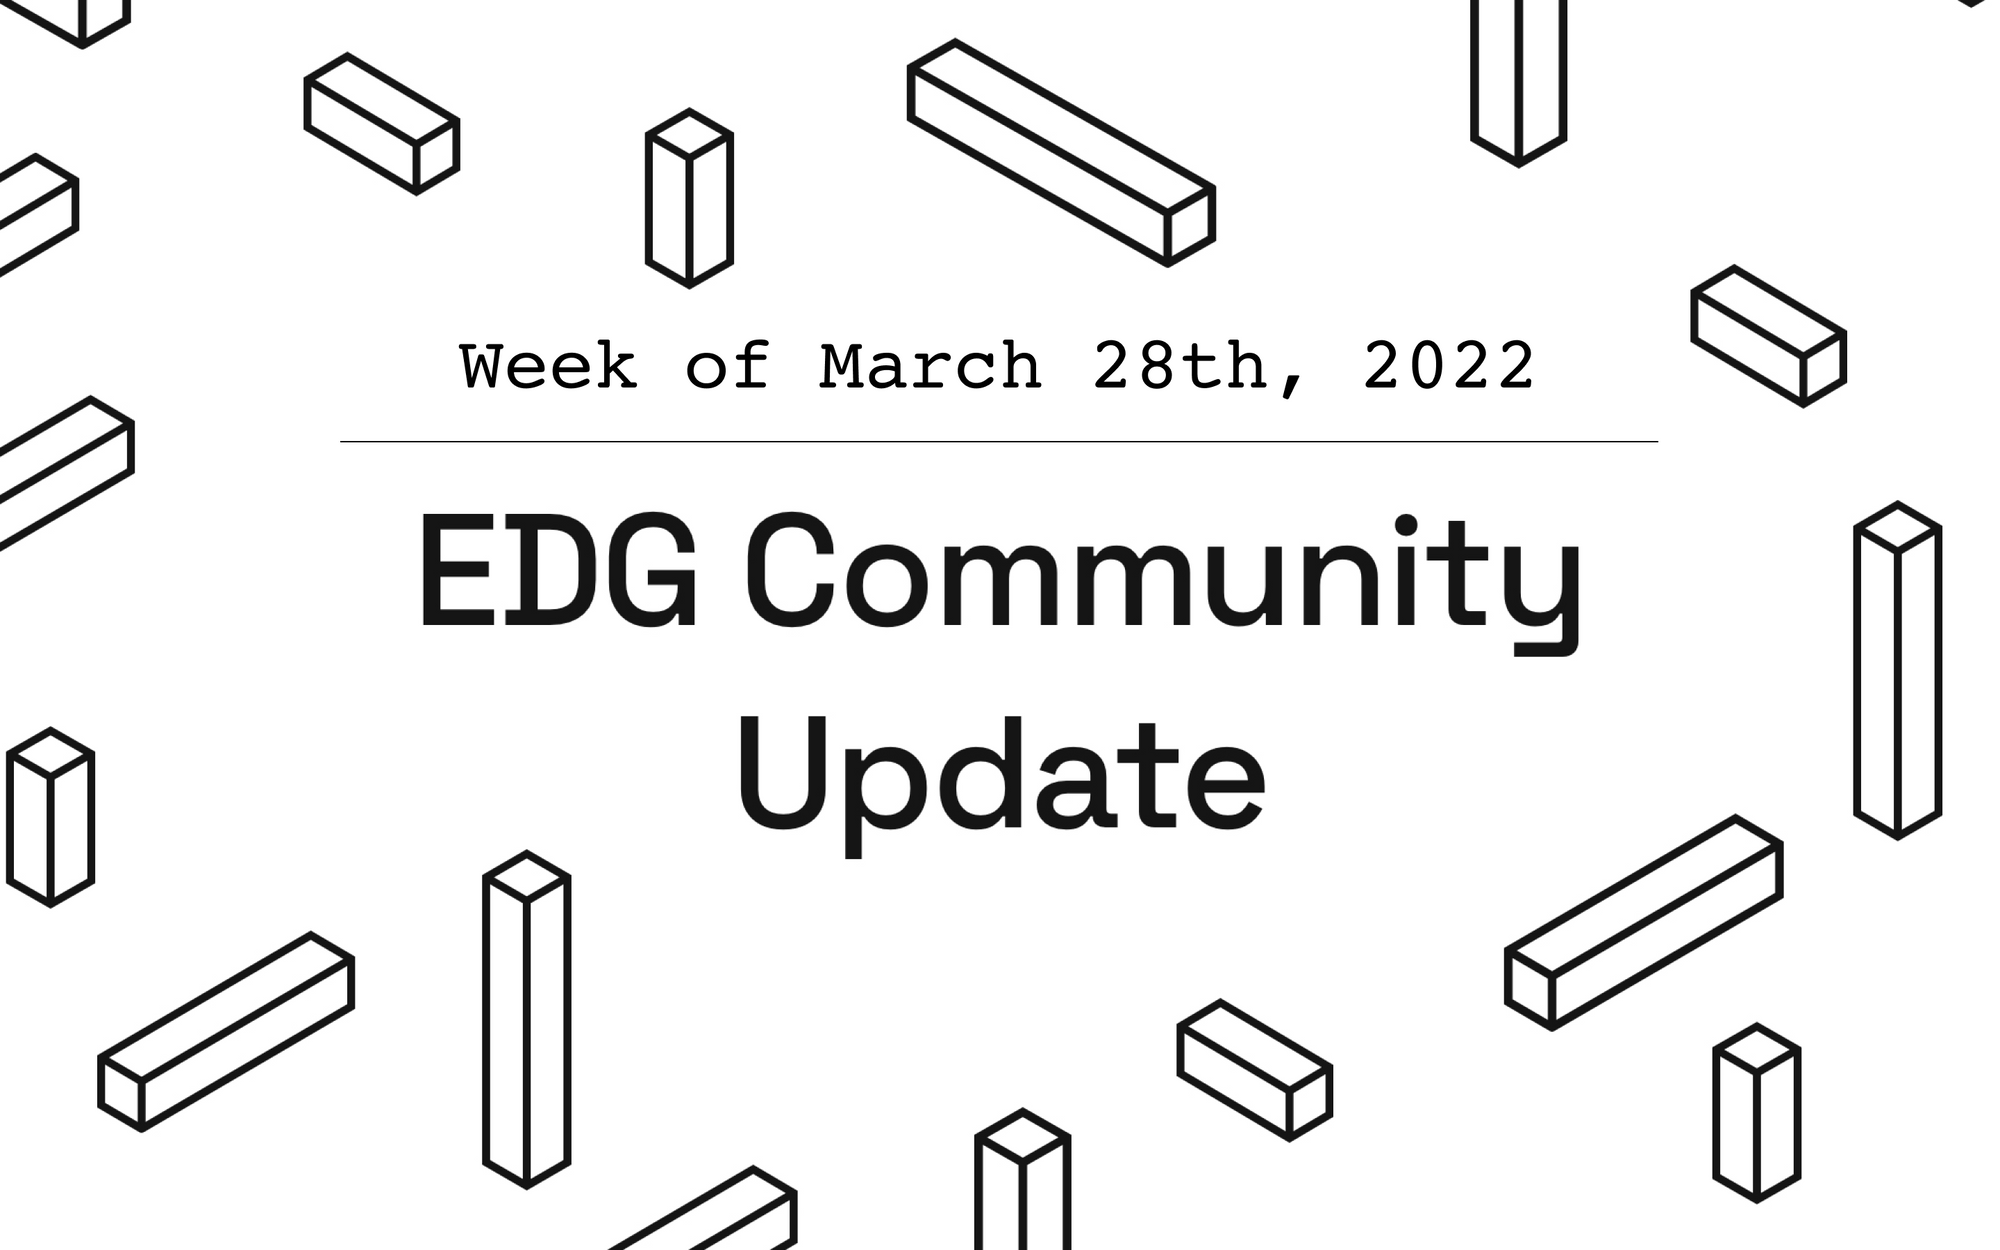 EDG Community Update: March 28th, 2022